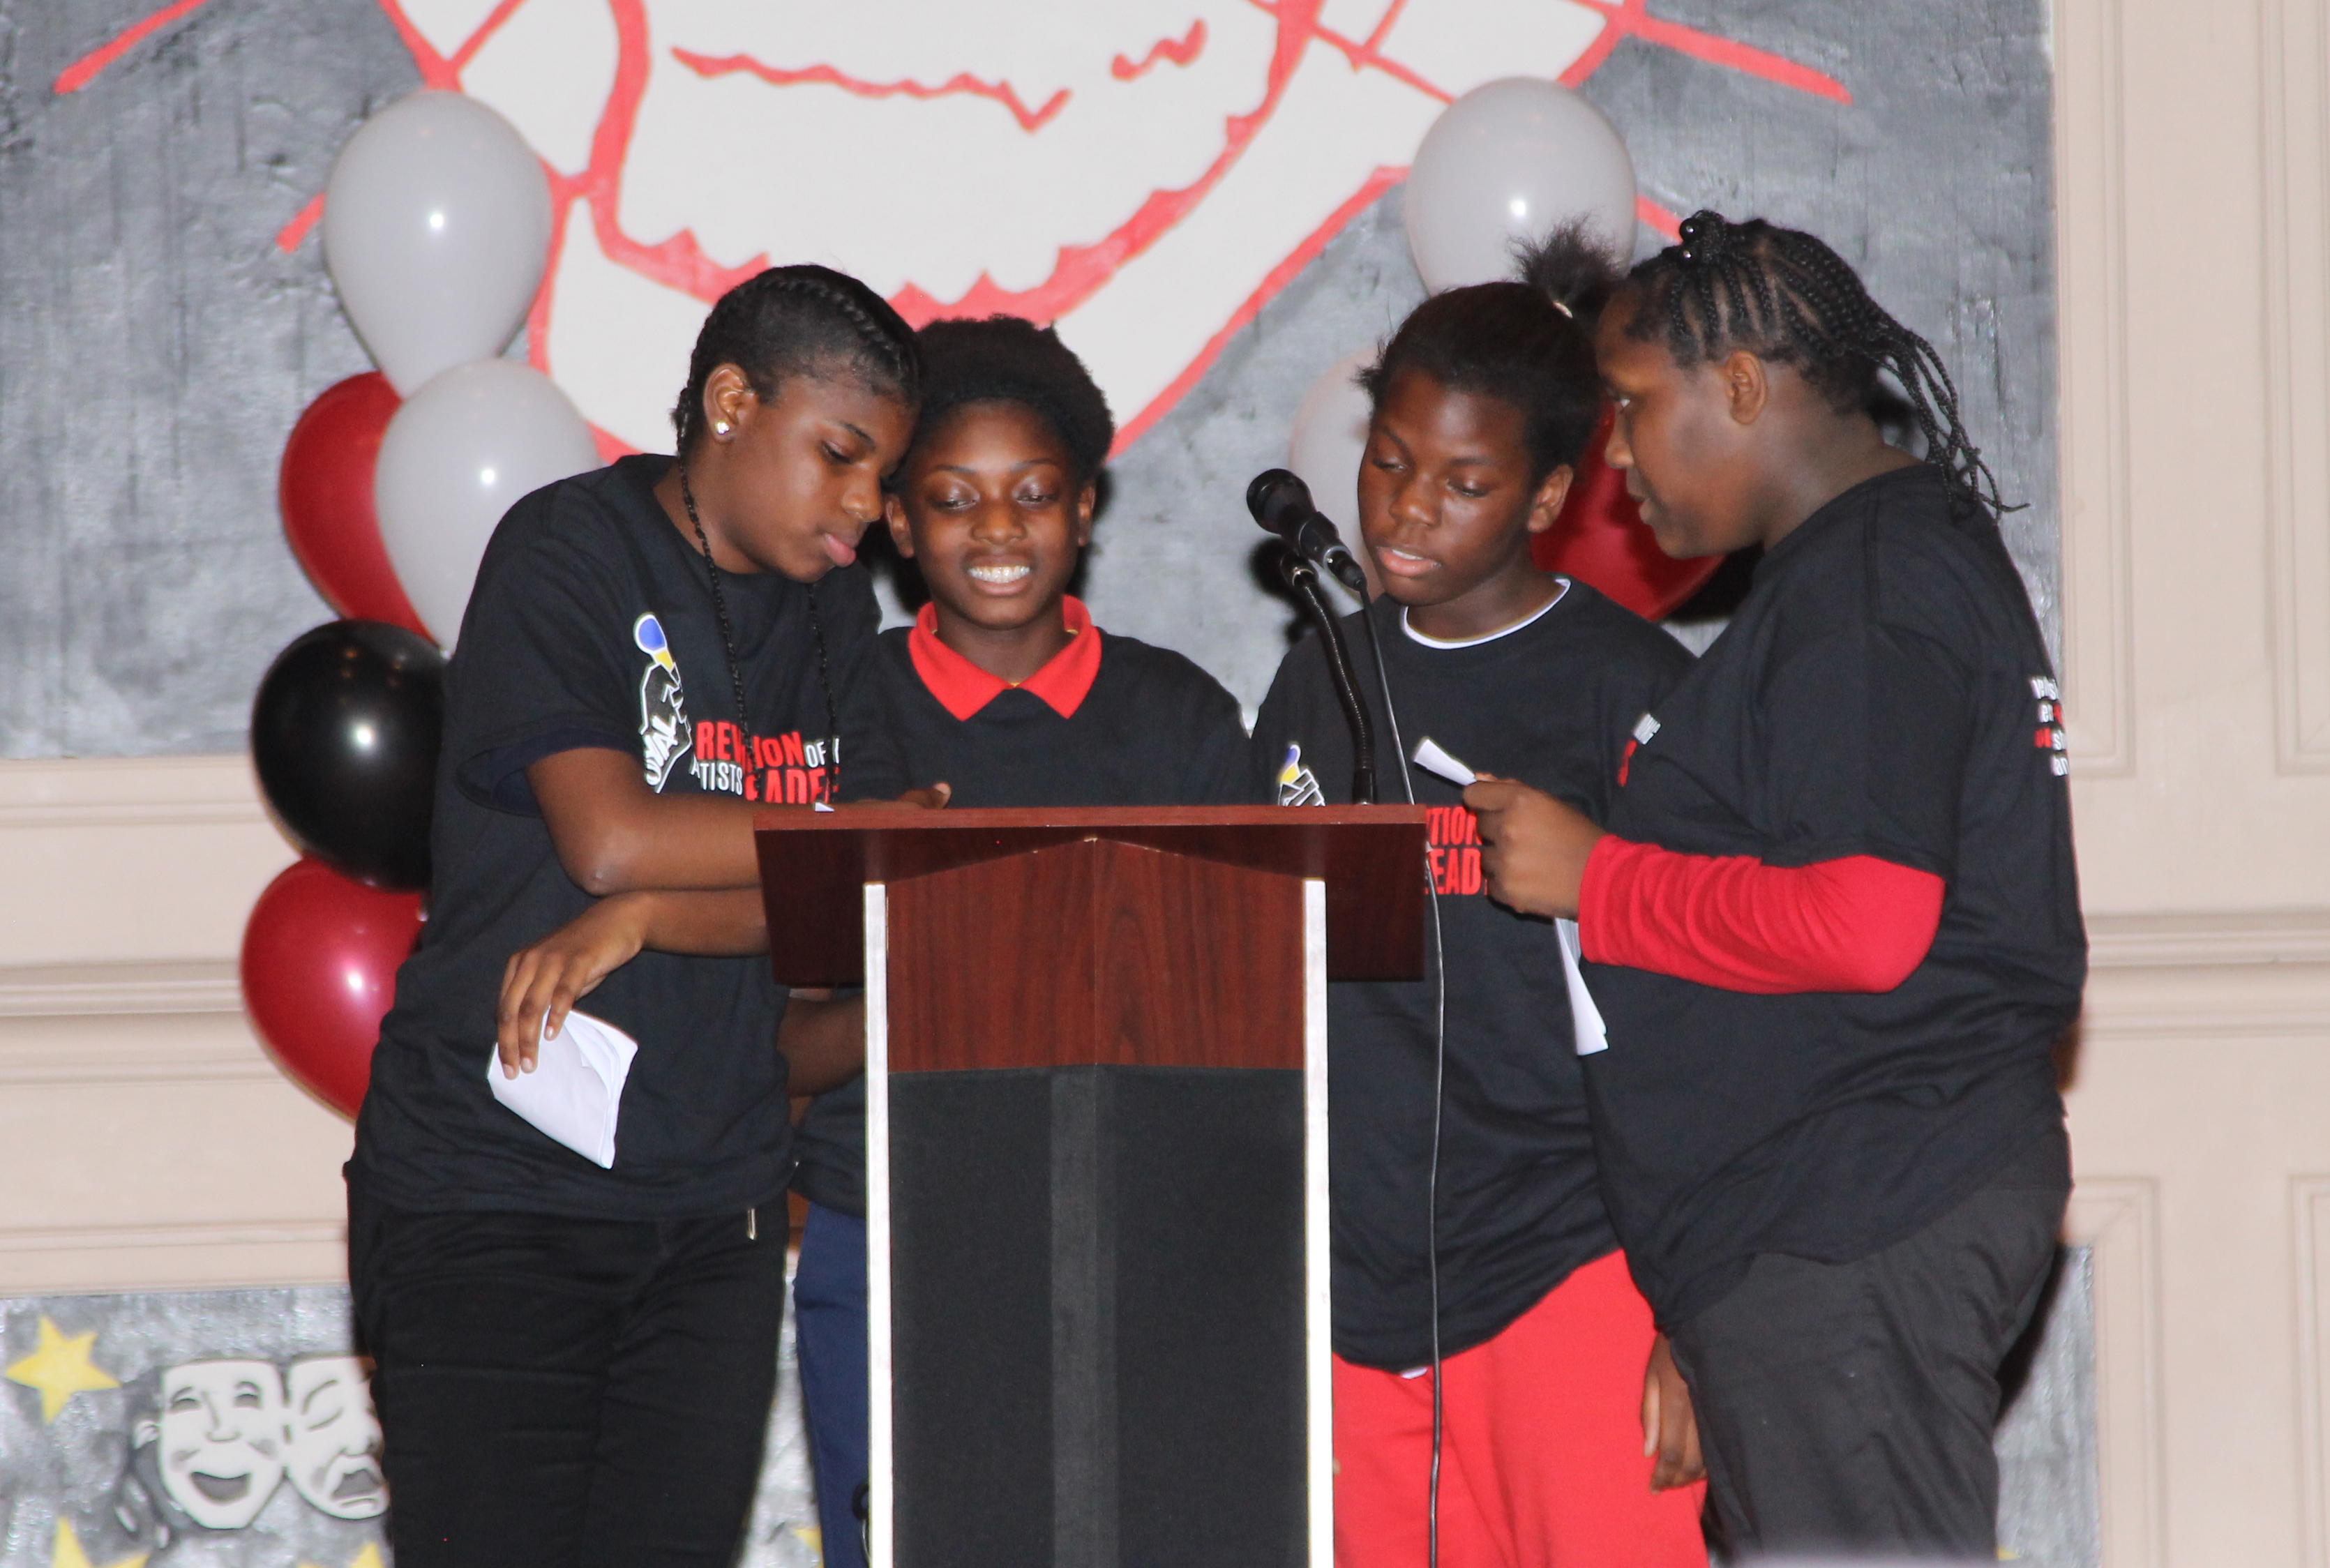 John Cook Elementary students in Auburn Gresham deliver a slam poetry performance in front of a crowd of more than 500 students, faculty, staff, and guests.